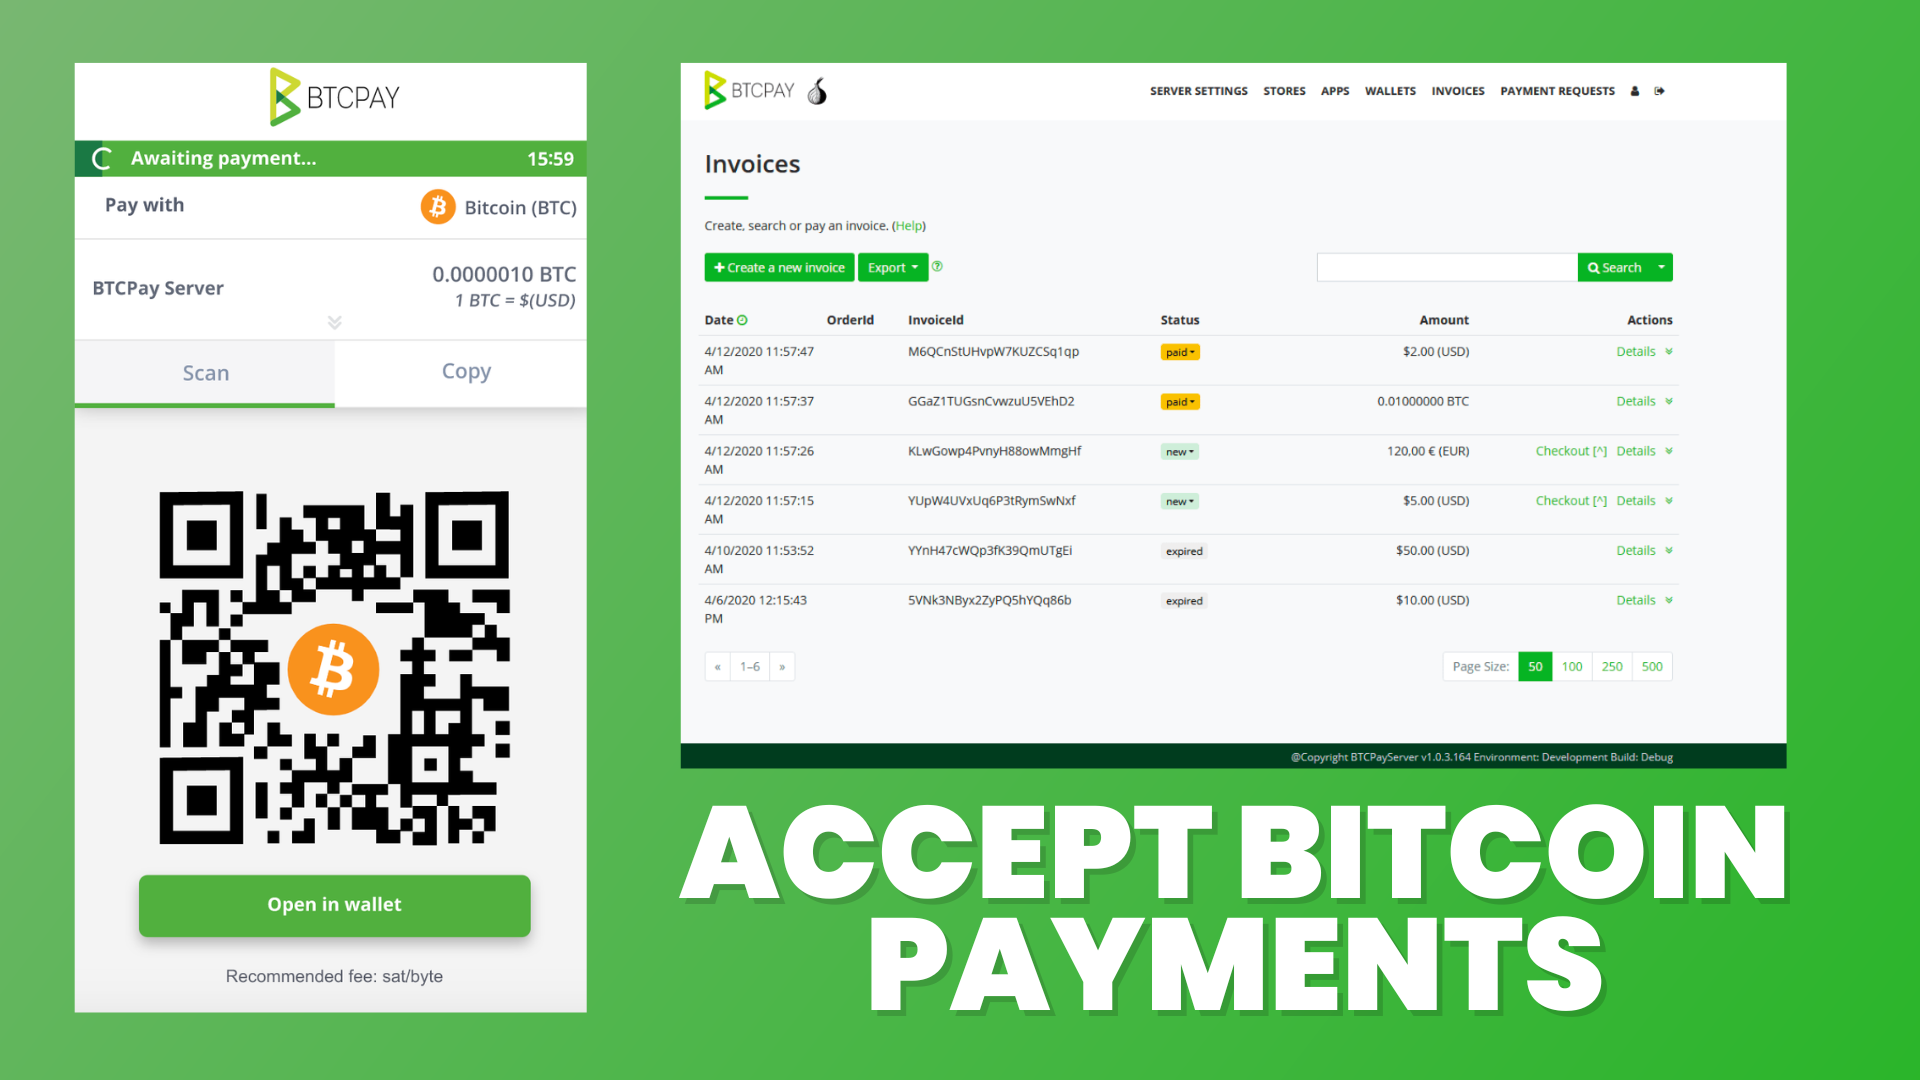 BTCPay Server: Accept Bitcoin Payments without fees